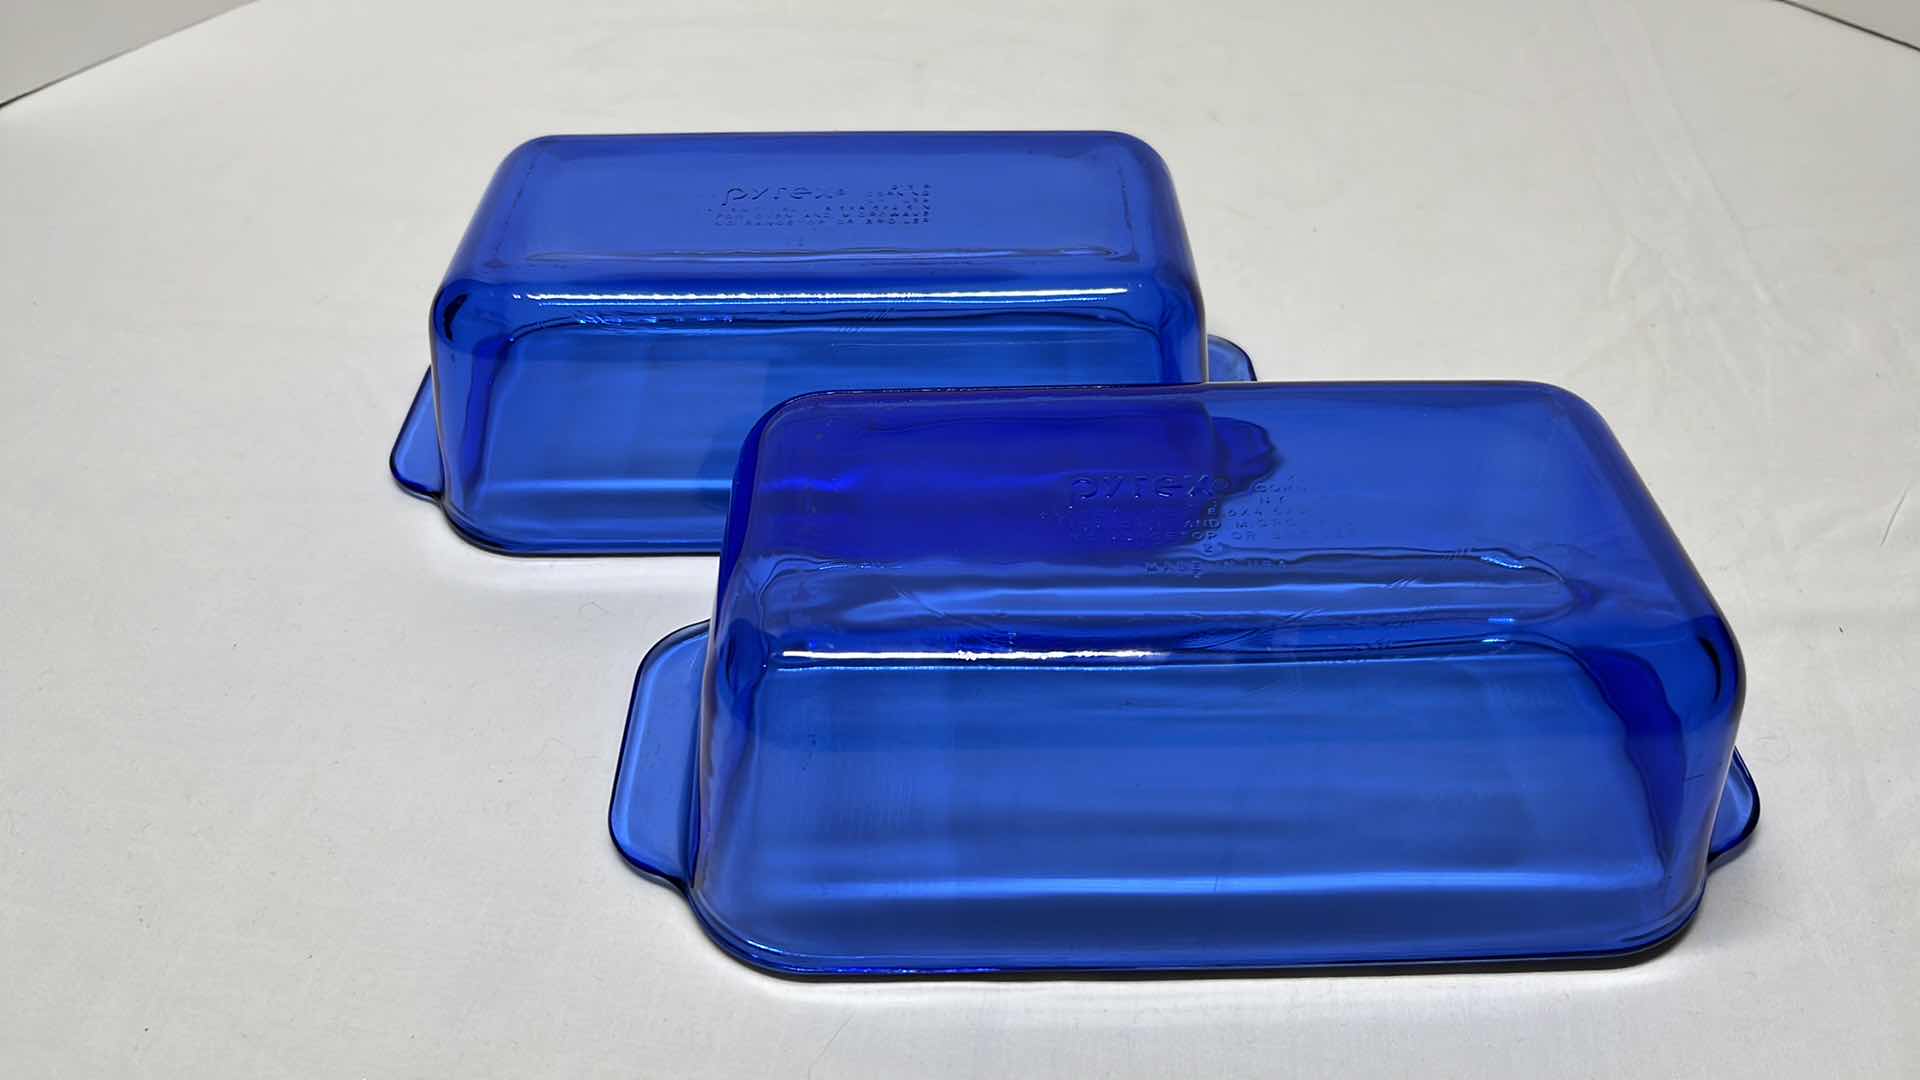 Photo 2 of 2 PYREX CORNING WARE 1.5 QT LOAF PANS